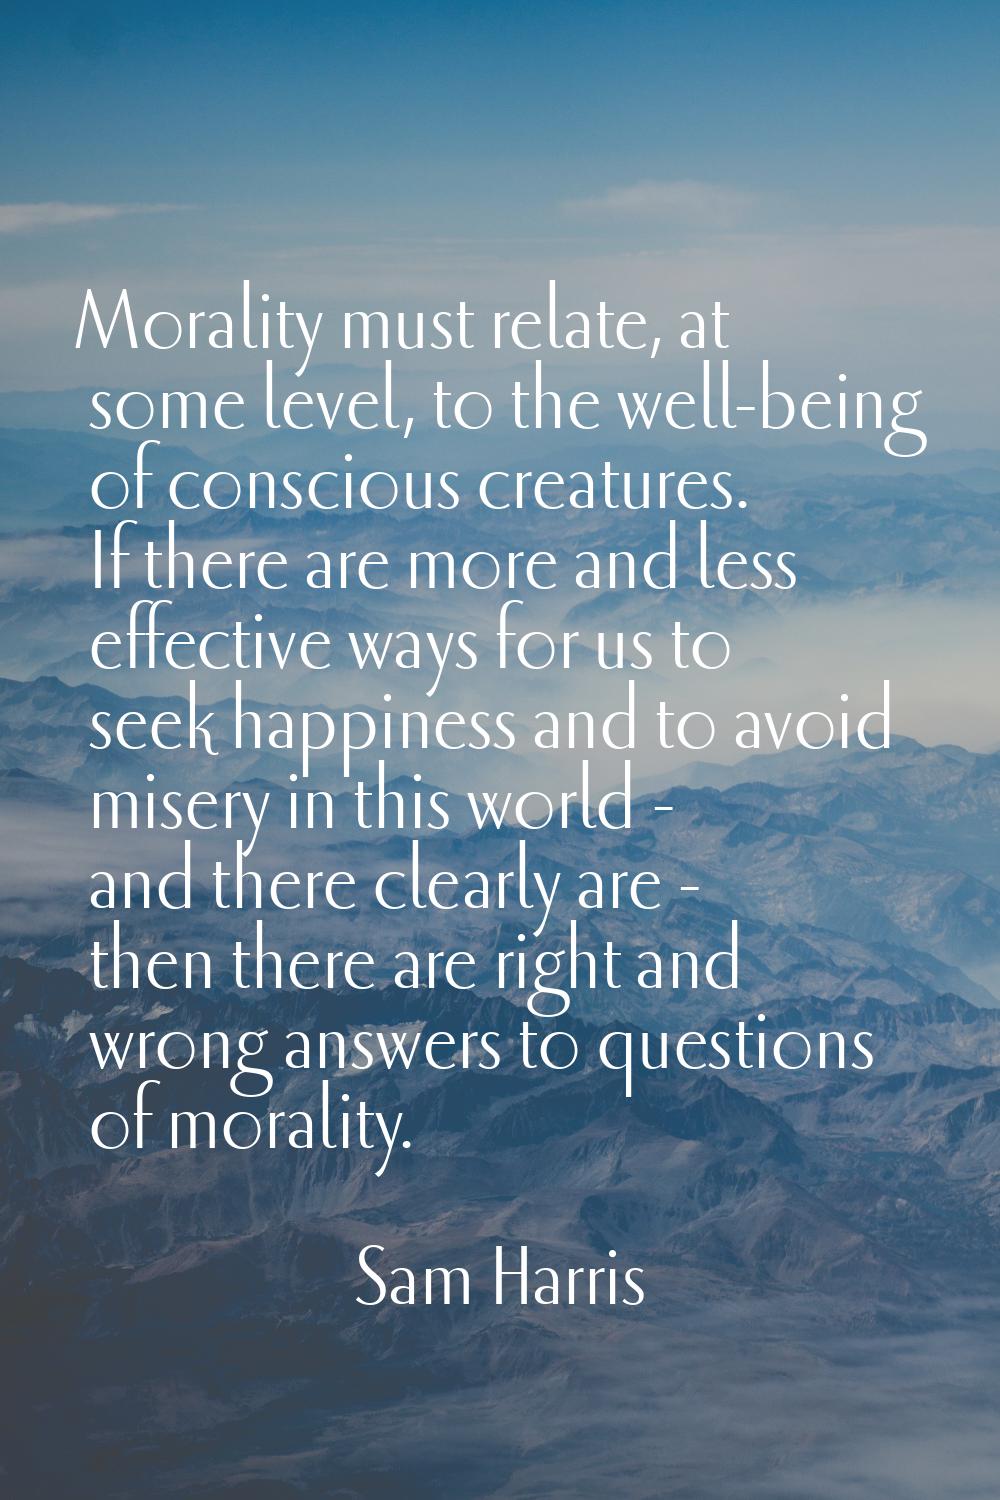 Morality must relate, at some level, to the well-being of conscious creatures. If there are more an